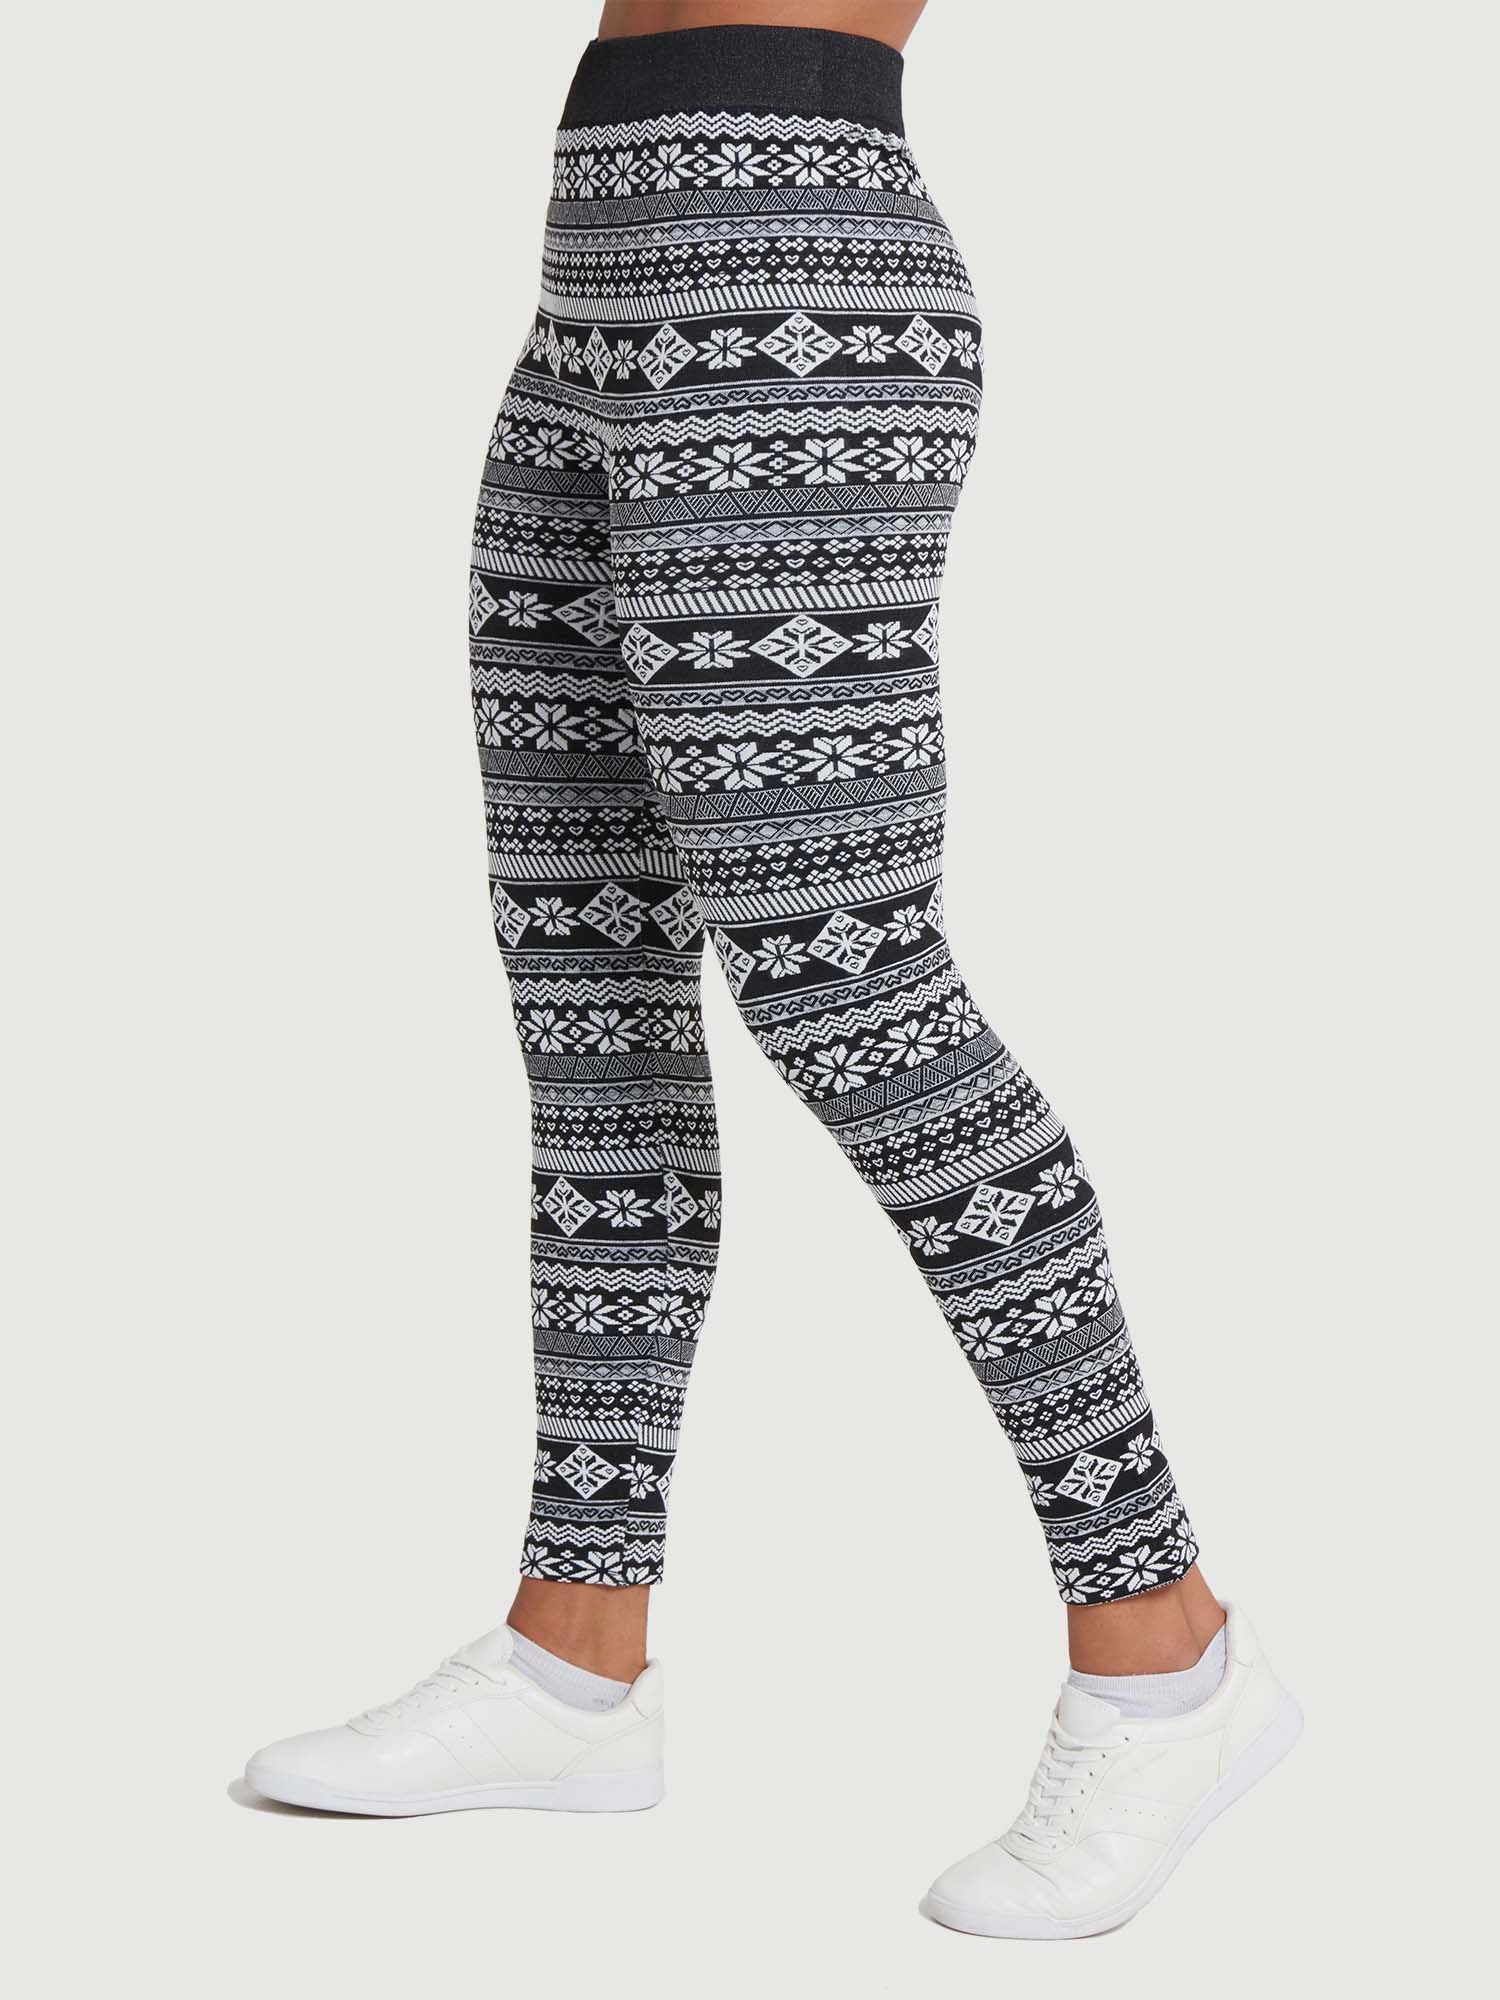 One or Two Pairs of Women's Thermal Fleece-Lined Leggings